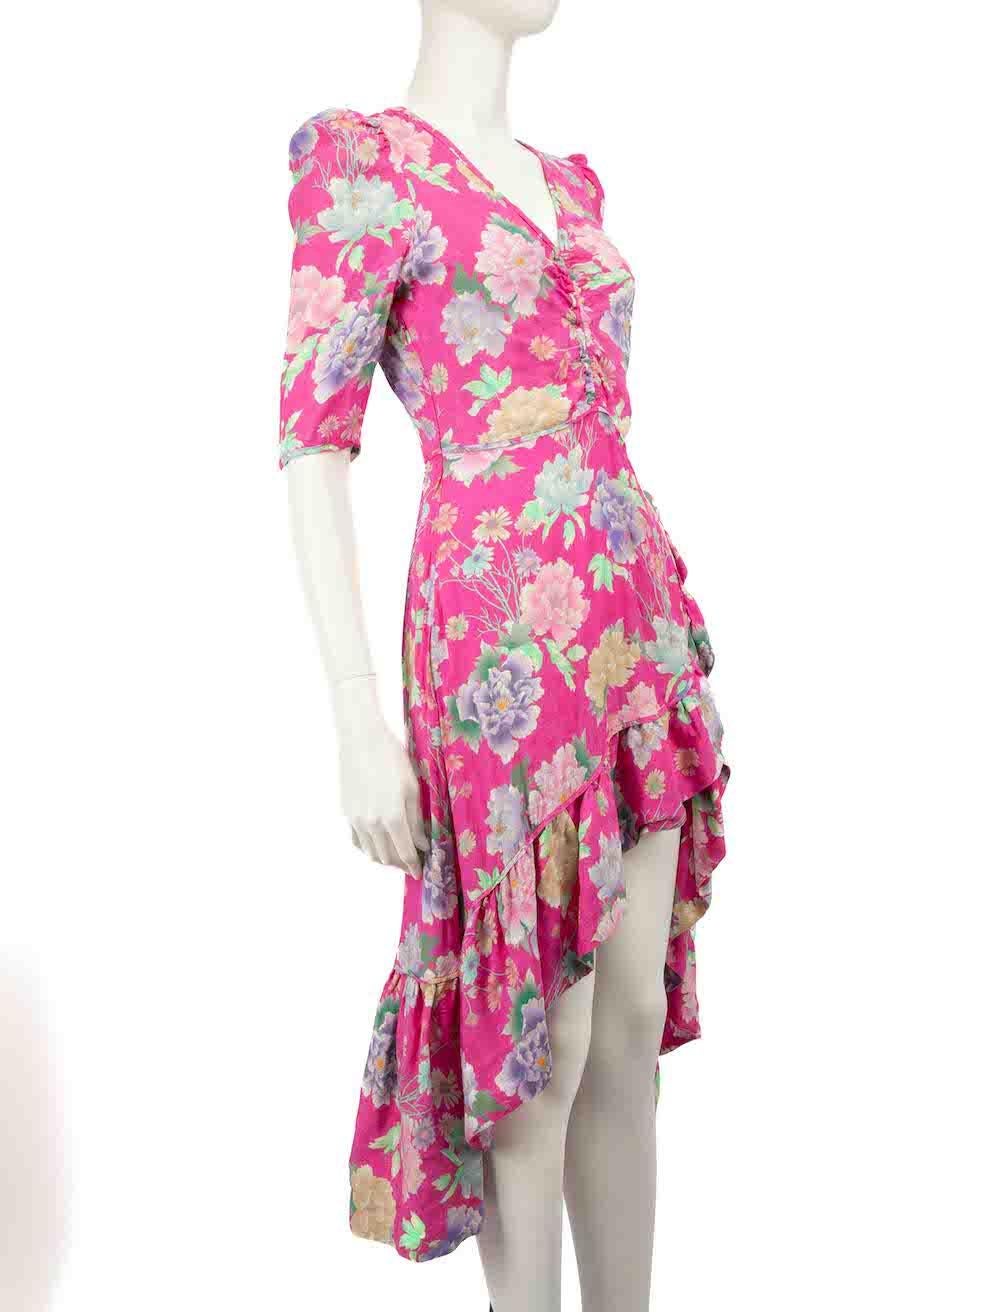 CONDITION is Very good. Hardly any visible wear to dress is evident on this used Sandro designer resale item.
 
 
 
 Details
 
 
 Pink
 
 Viscose
 
 Dress
 
 Floral pattern
 
 Midi
 
 Ruffle trim
 
 V-neck
 
 Ruched detail
 
 Asymmetric hem
 
 Side